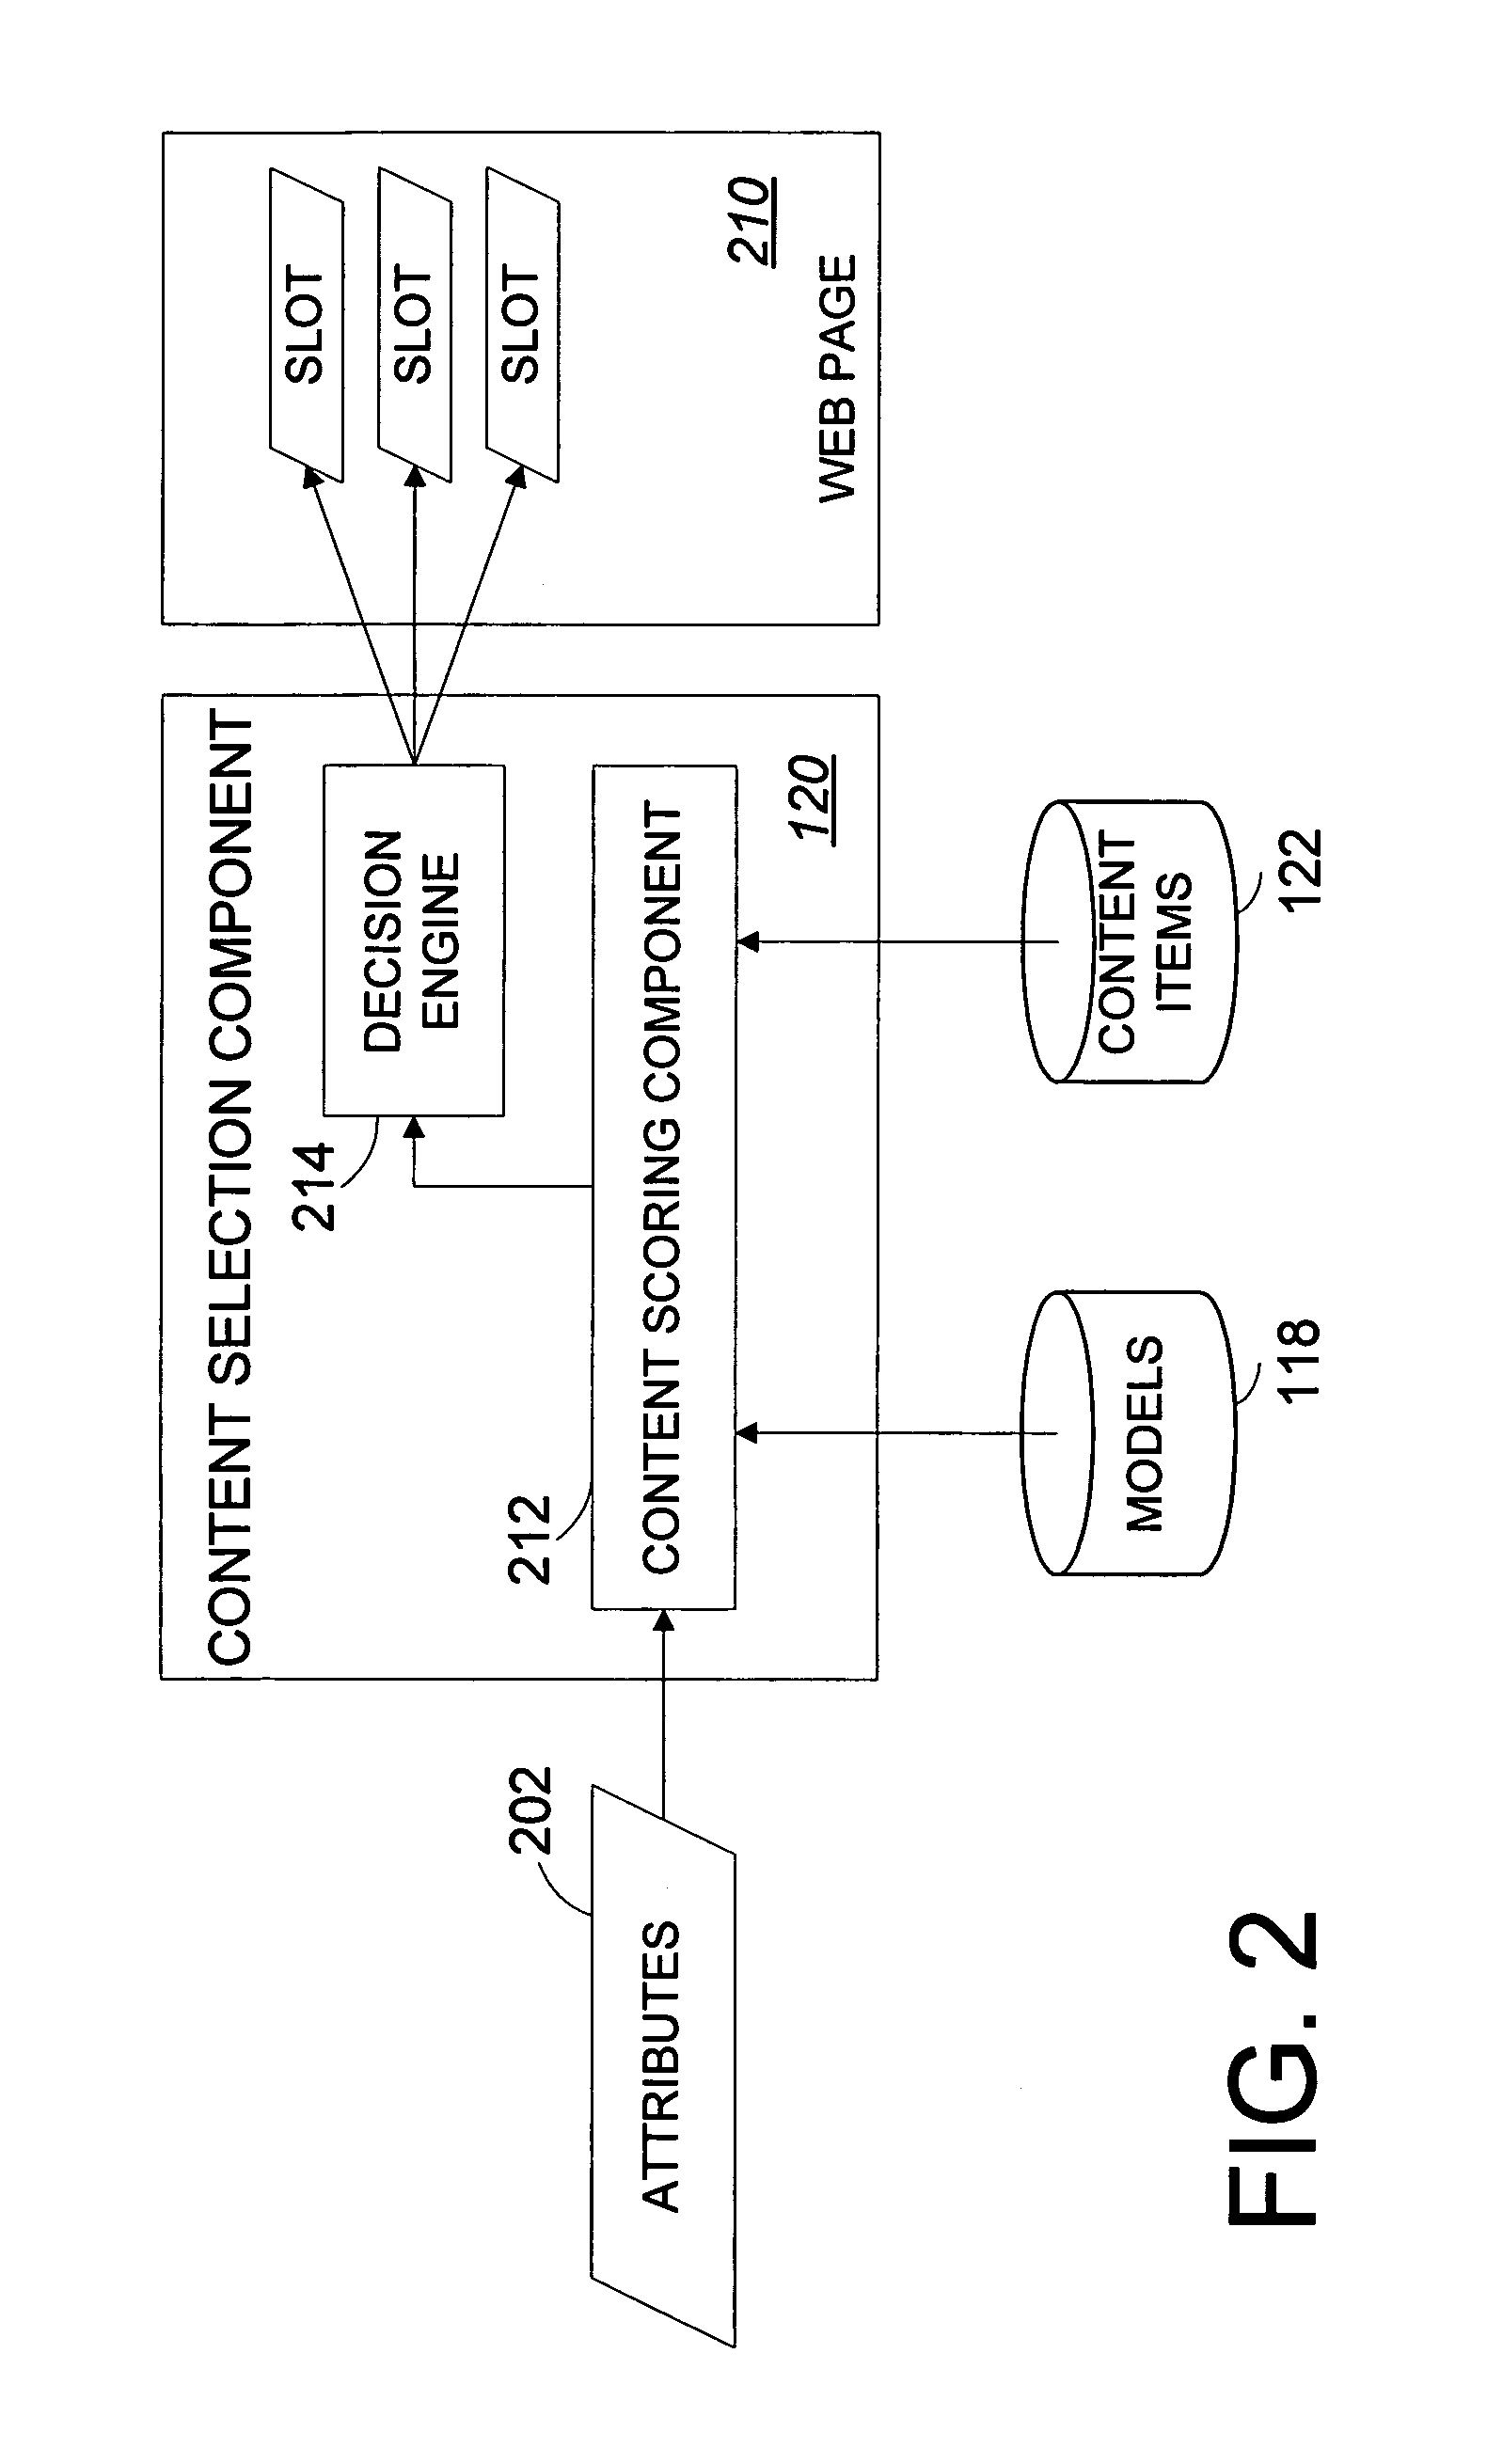 Systems and methods for statistically selecting content items to be used in a dynamically-generated display